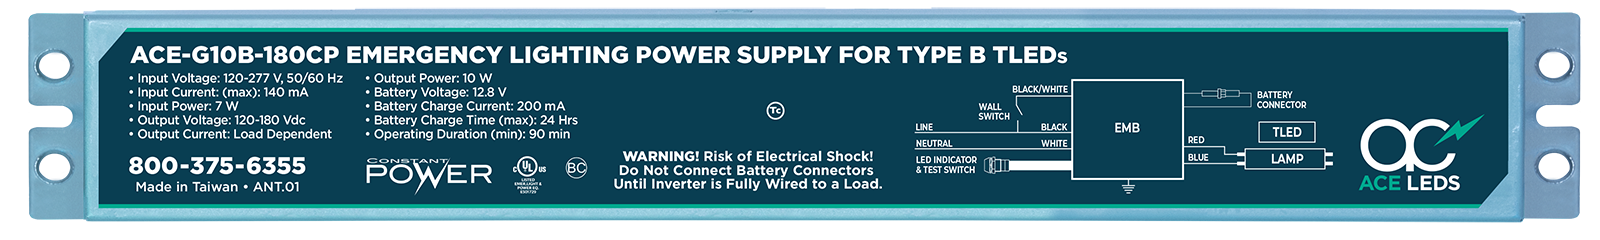 Power Supply for Type B TLED